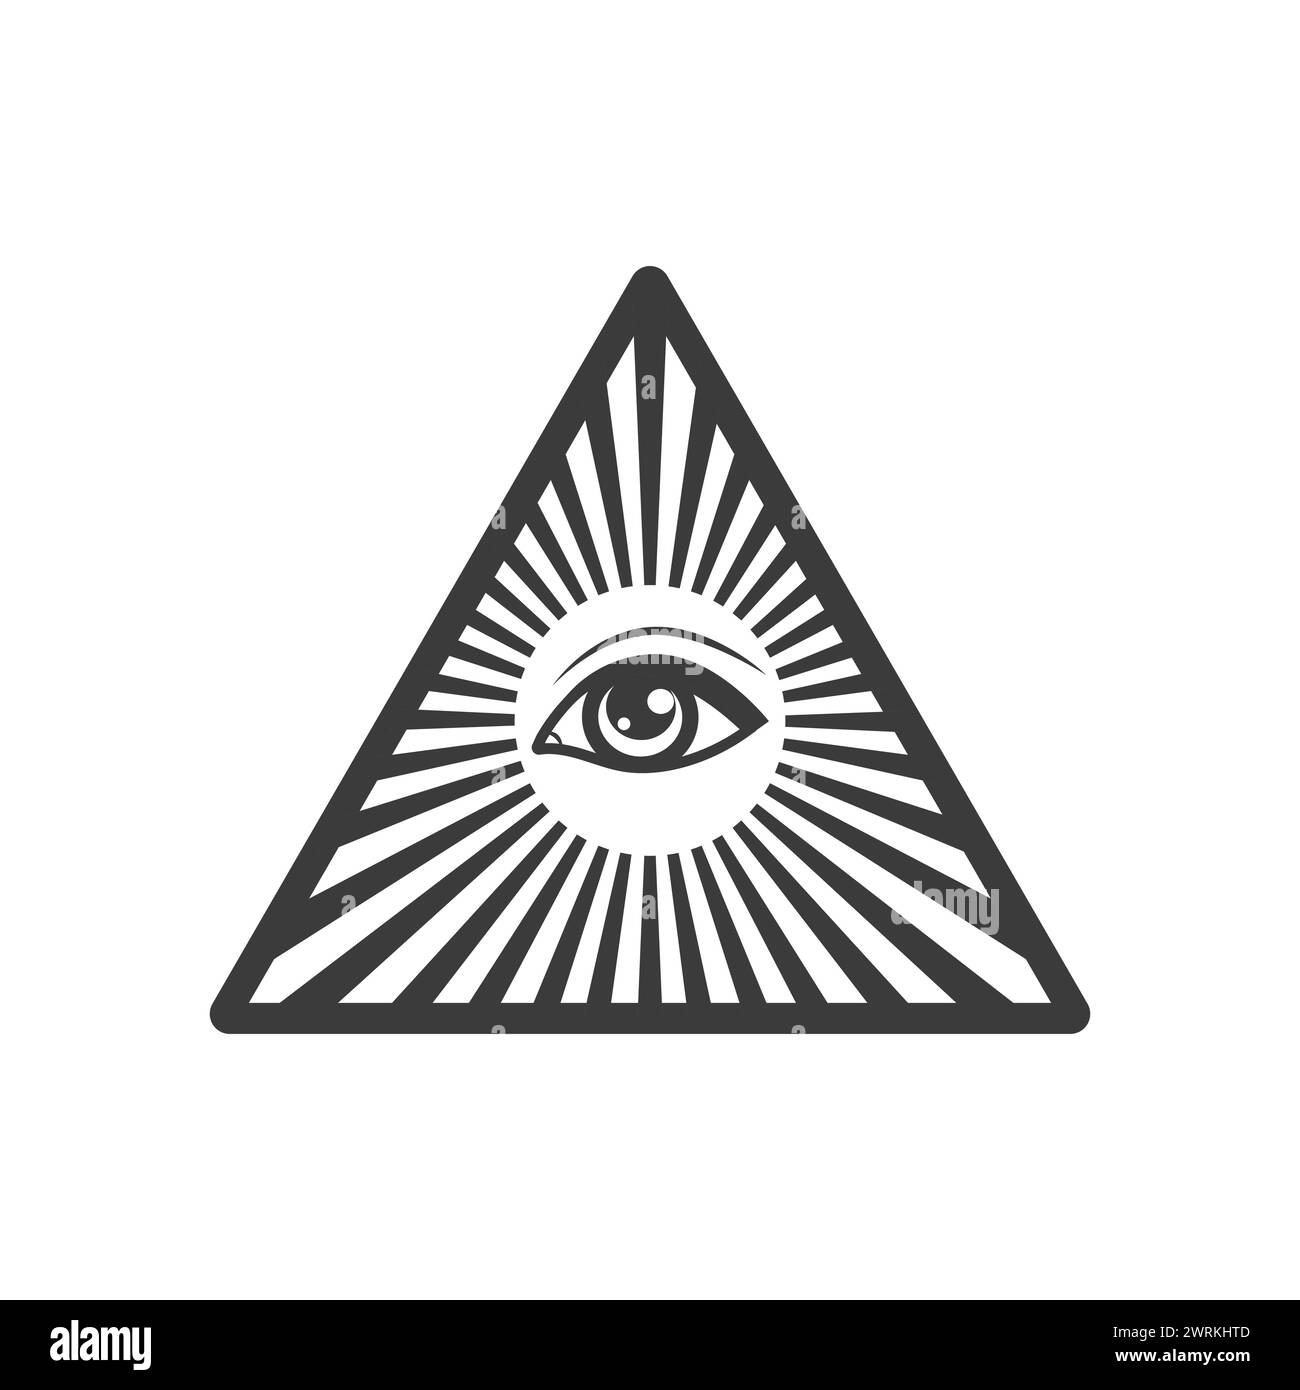 All-seeing eye on pyramid of freemasons symbols of occultism, illuminati secret society, Vector elements isolated on white Stock Vector